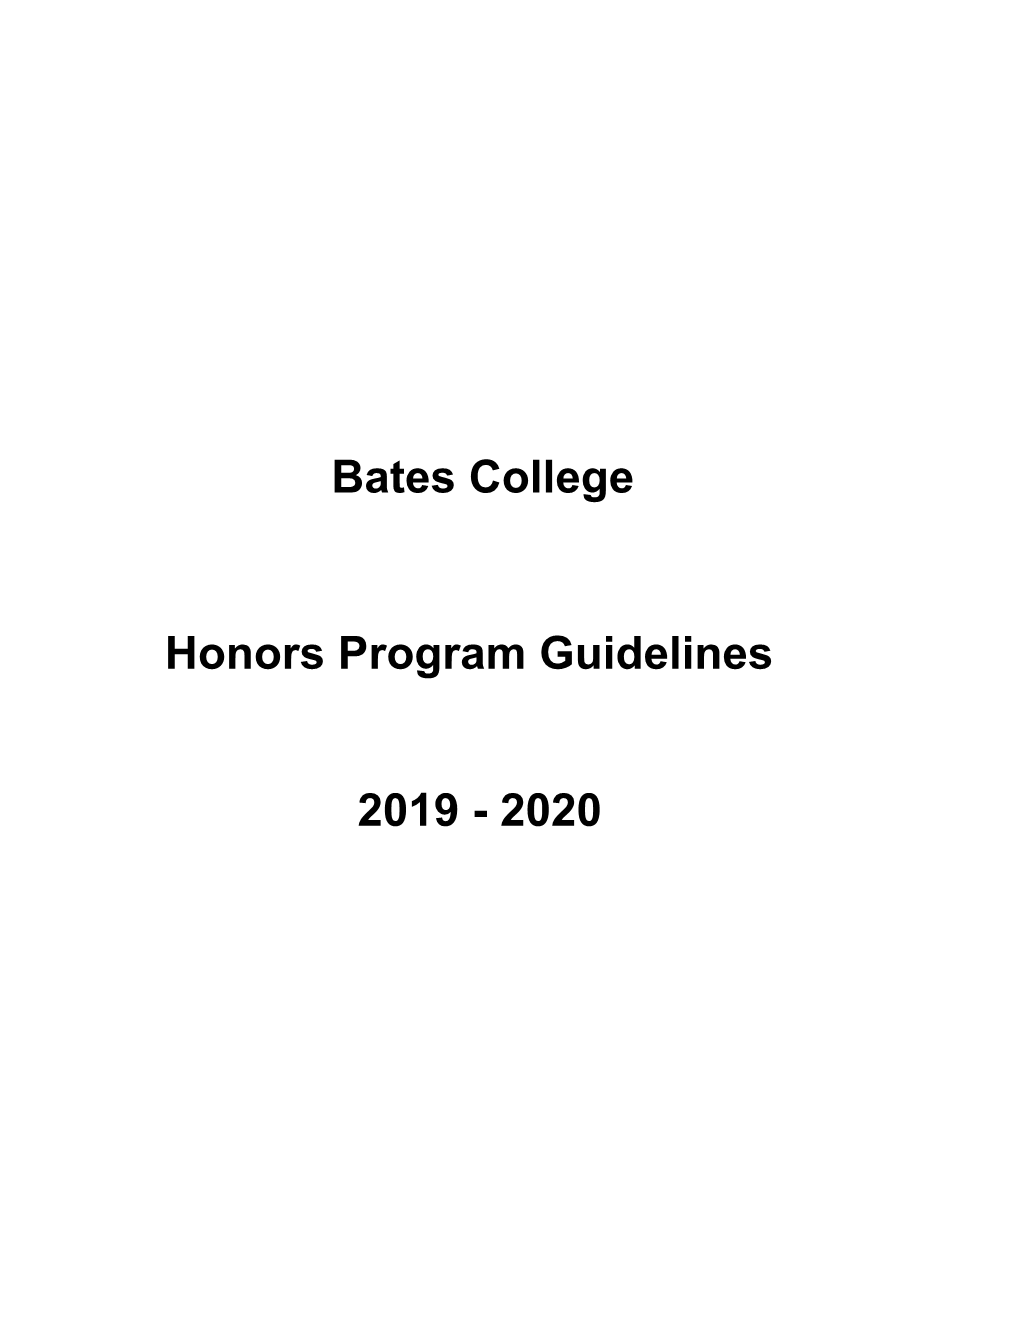 Bates College Honors Program Guidelines 2019